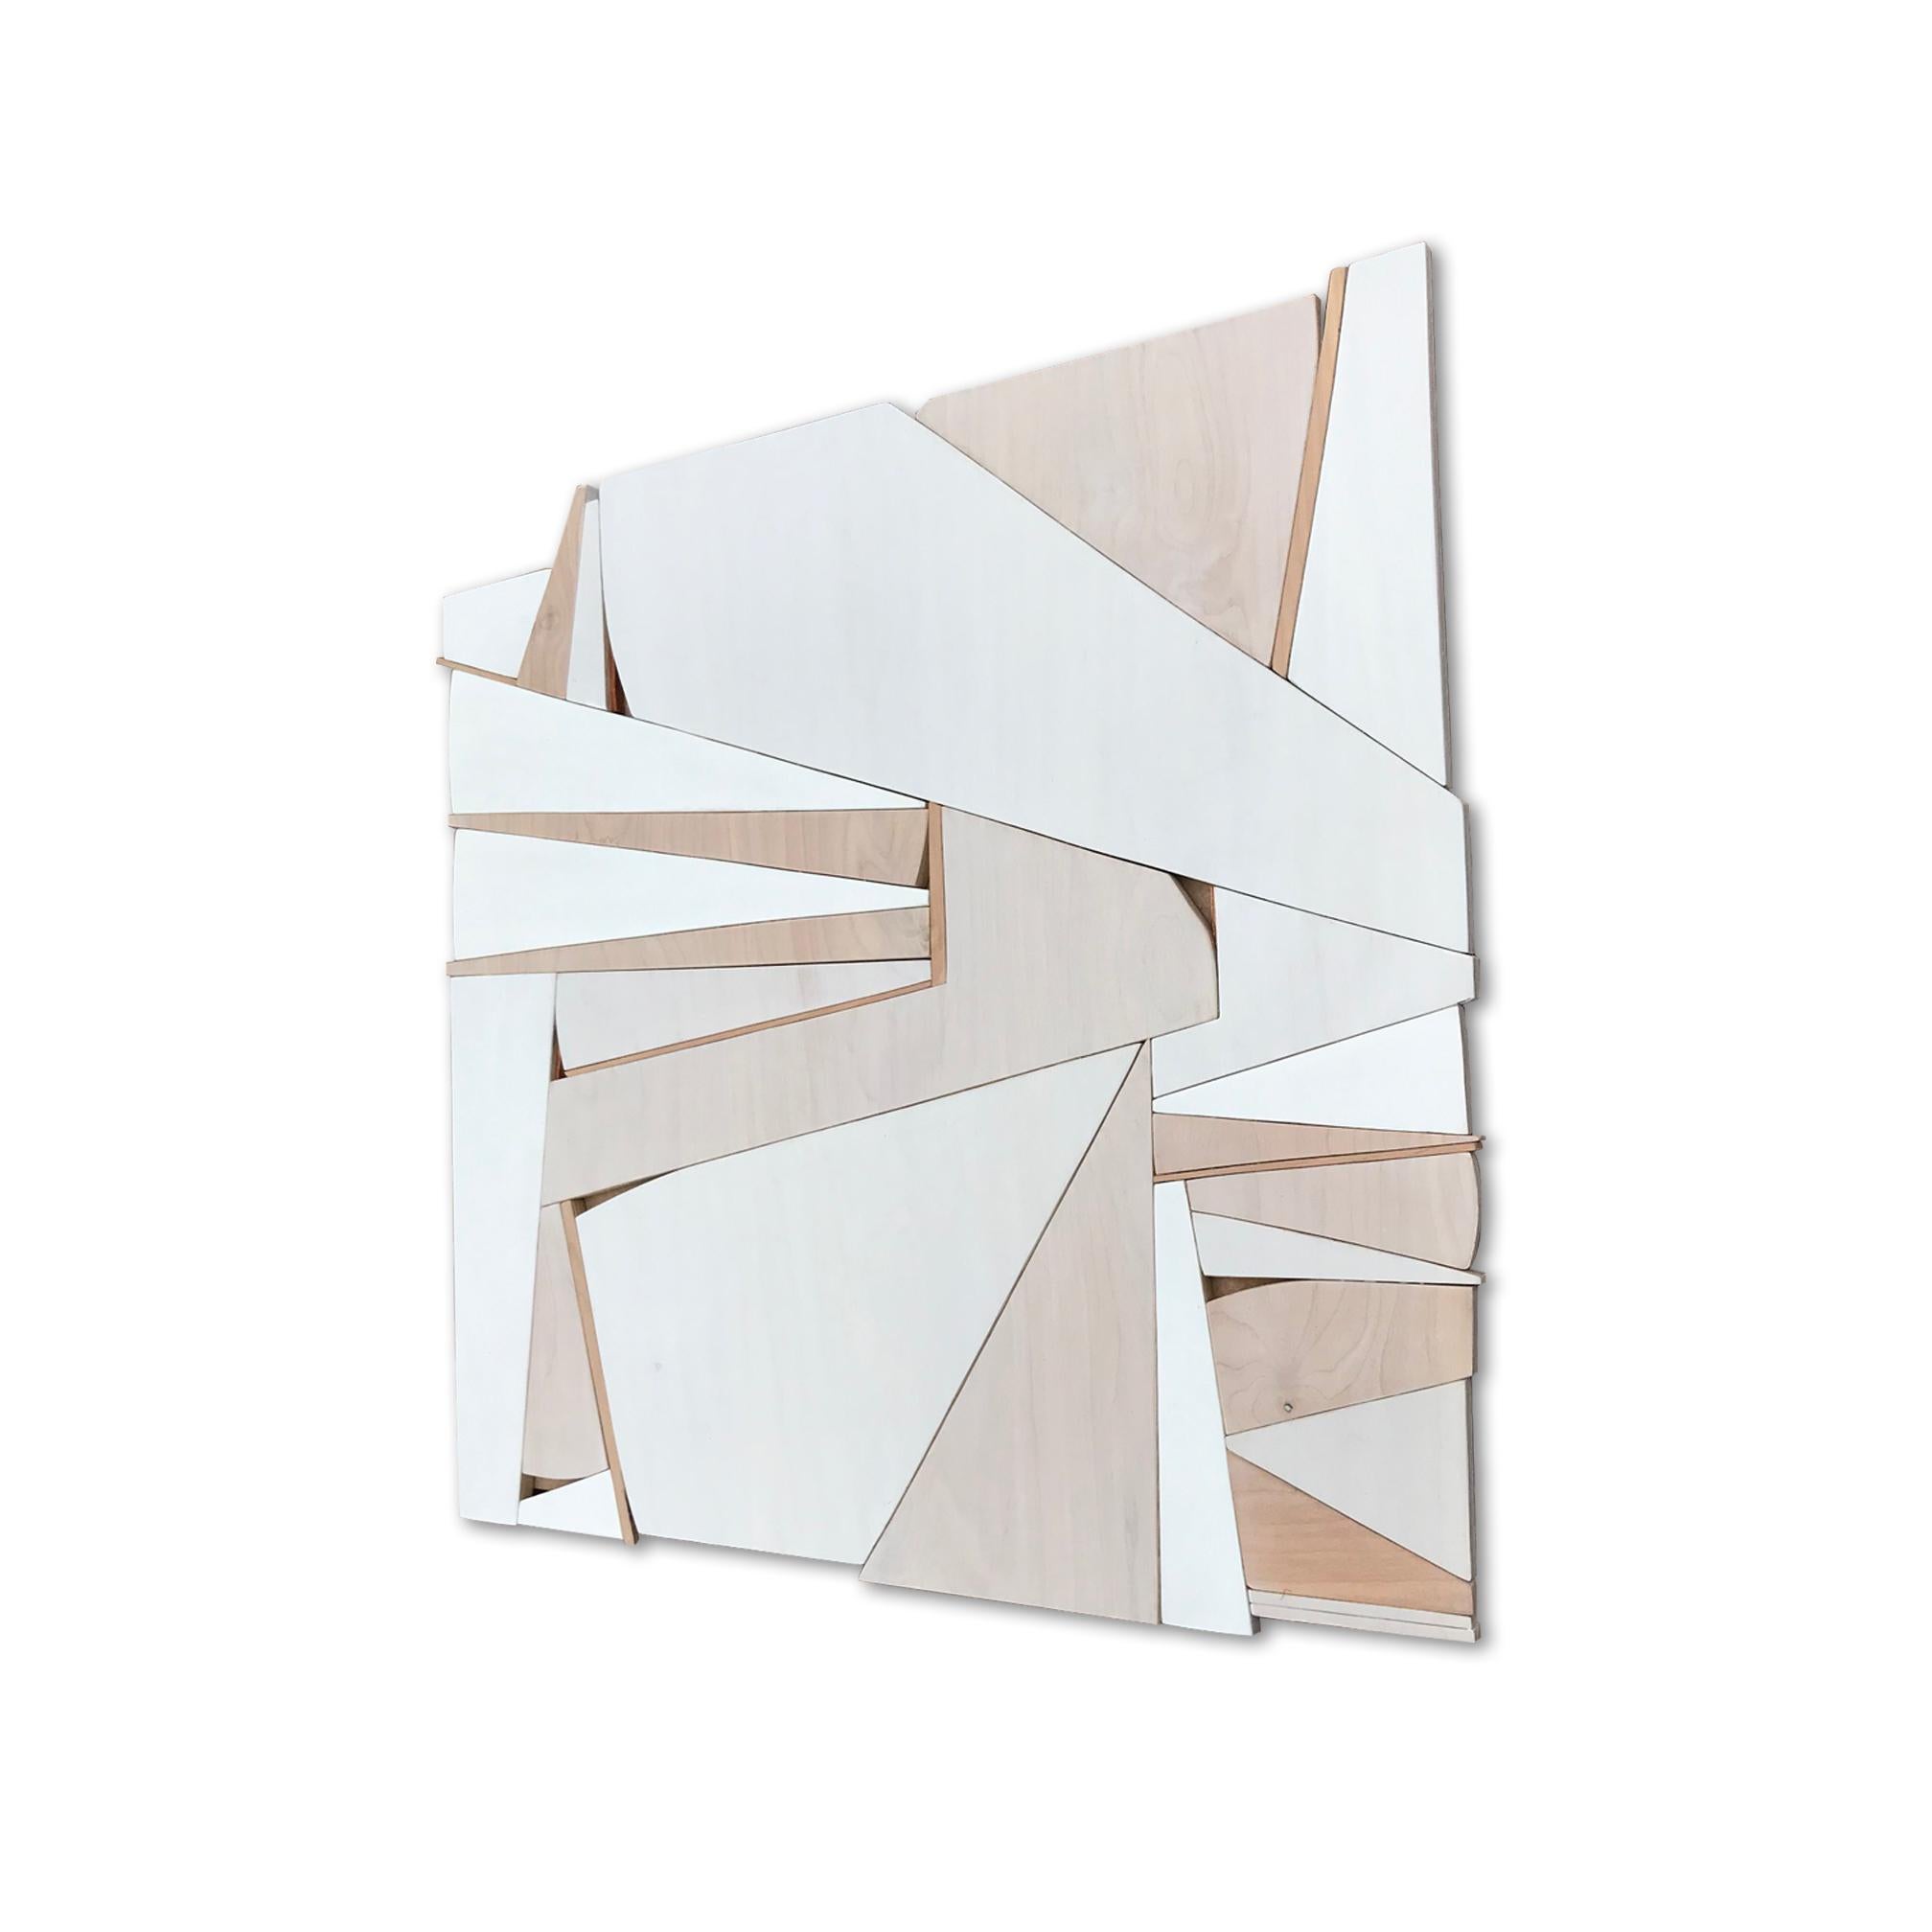 NOTE: This is for a commission piece based on the original.  Can be ordered in custom sizes and colors.  Allow 4 weeks plus shipping.

ZigZag is a discreet and elegant minimalist contemporary wall sculpture. It is constructed with high-end birch